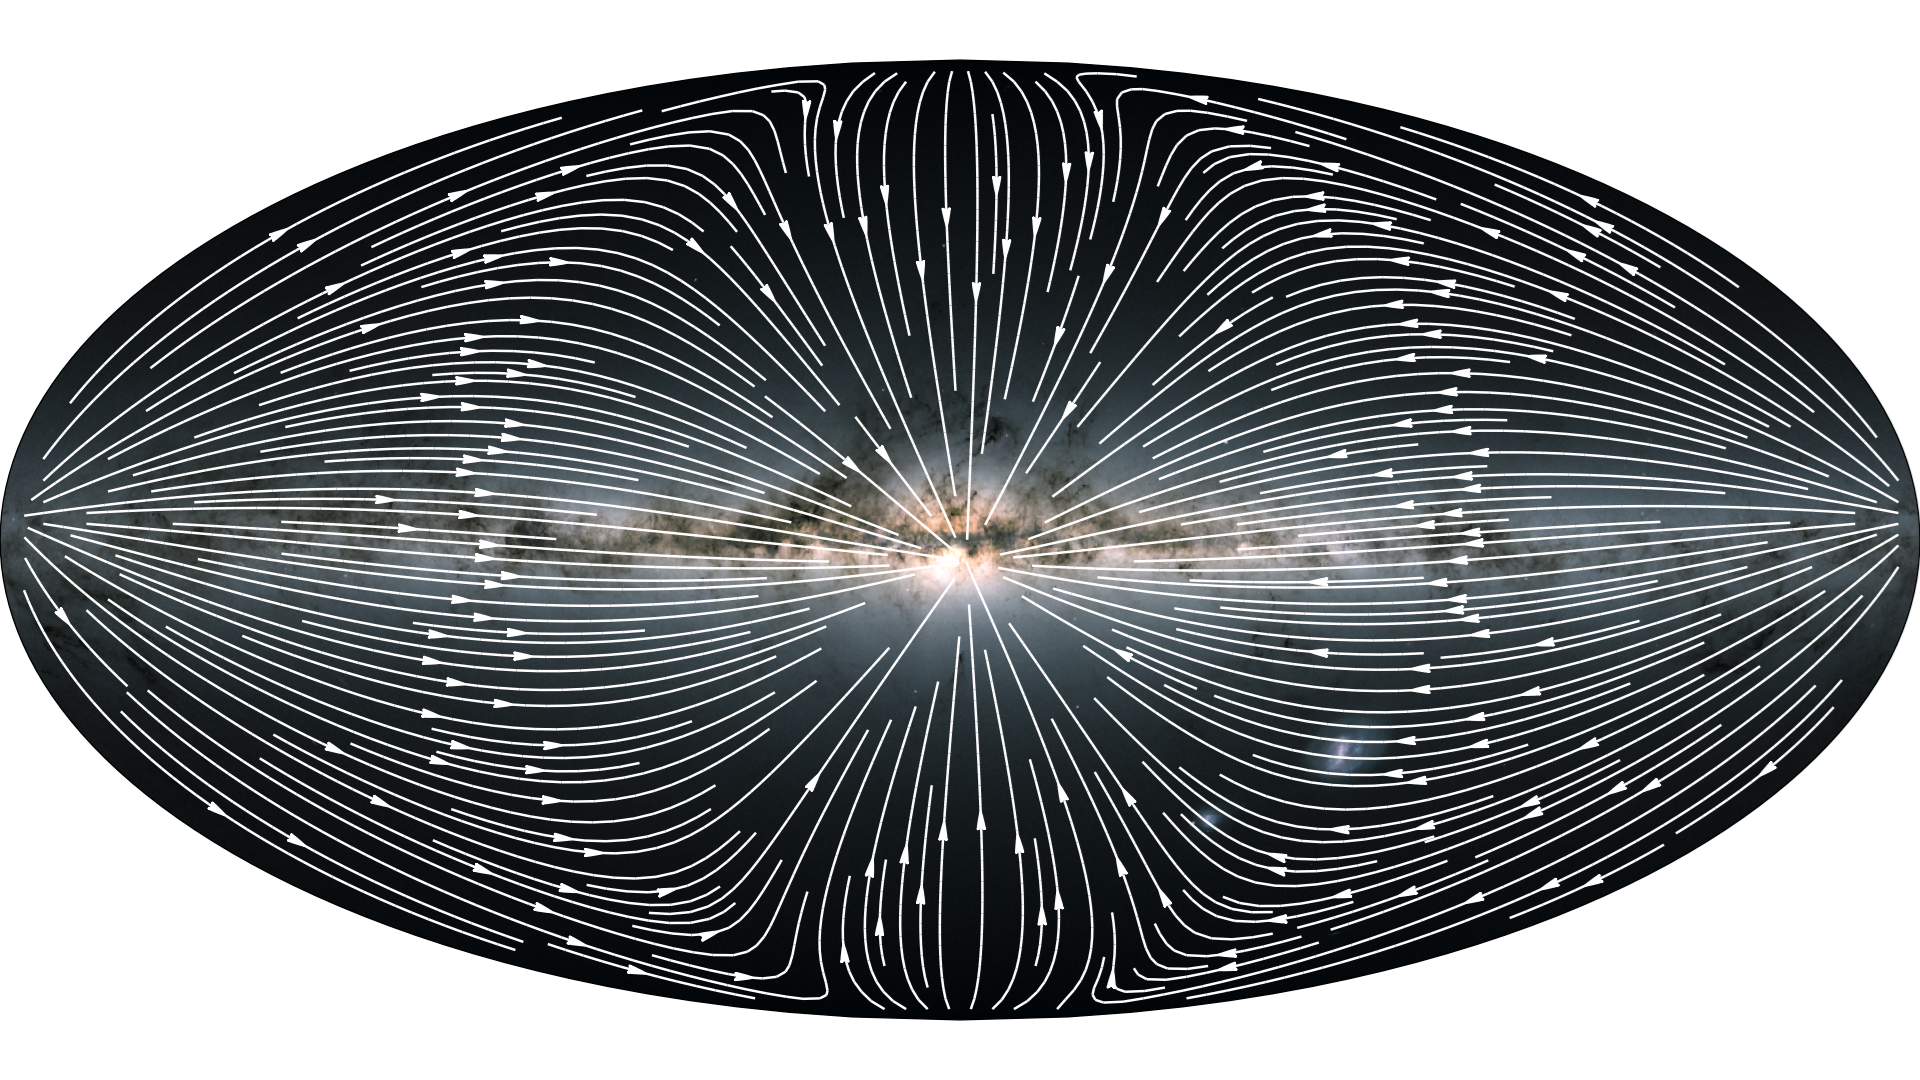 The acceleration of the Solar System is revealed in the apparent motion of the distant quasars toward the center of the Milky Way. In reality, the quasars do not have proper motion.